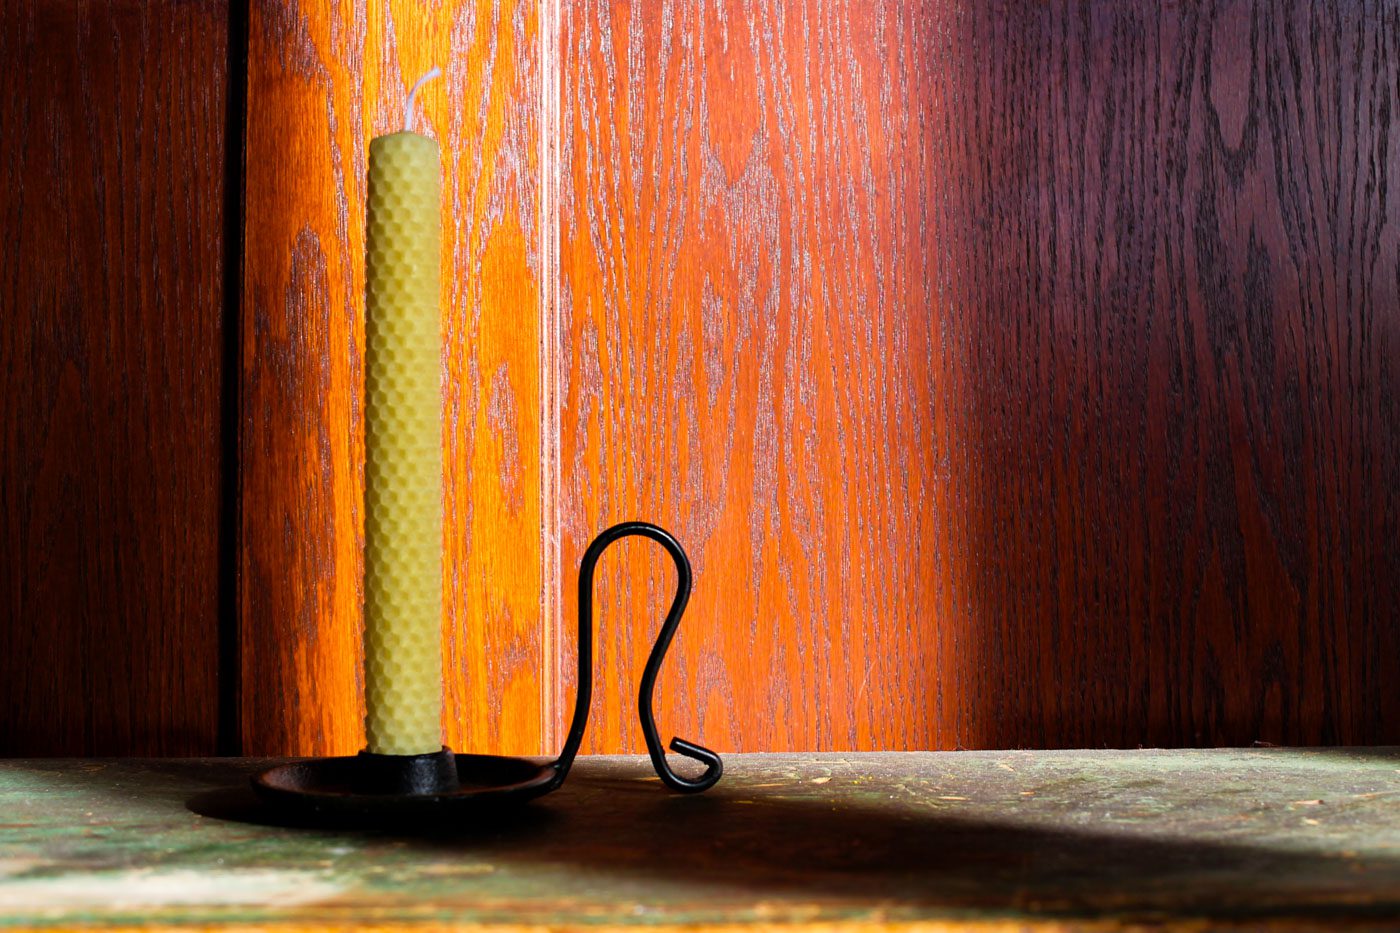 light shines in through a window onto a yellow rolled beeswax candle